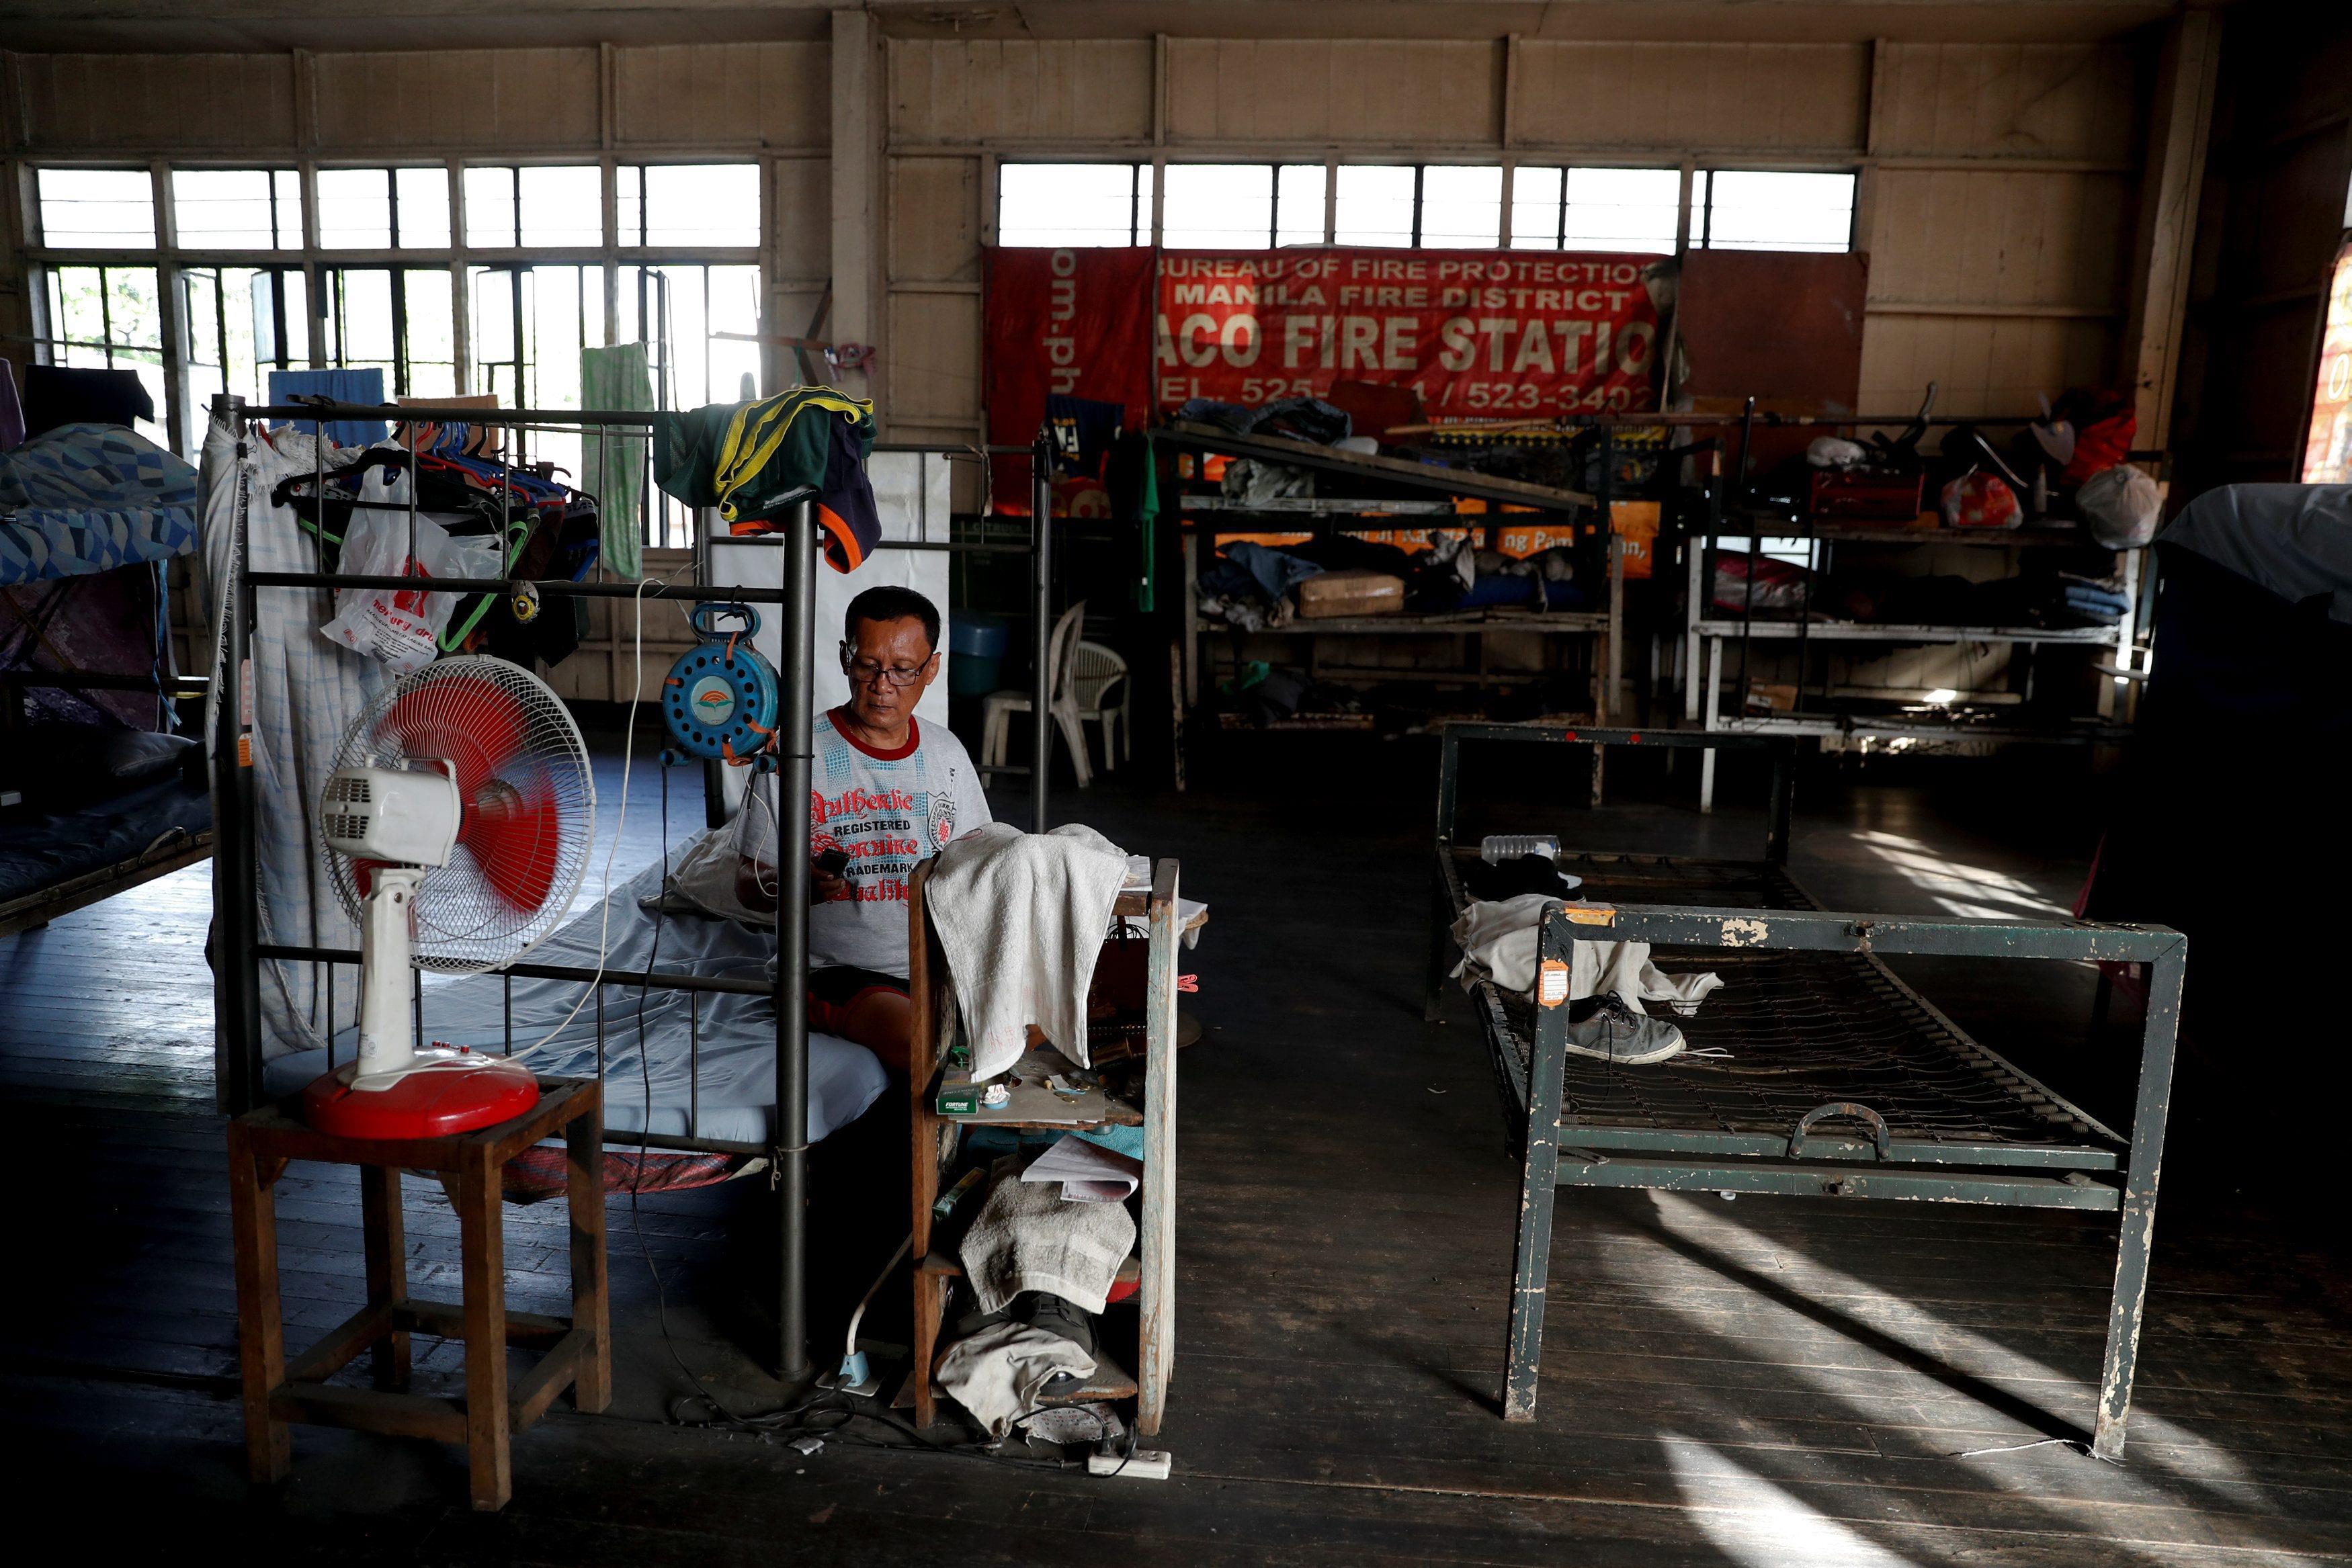 The Wider Image: Manila's slums an endless battle for firefighters